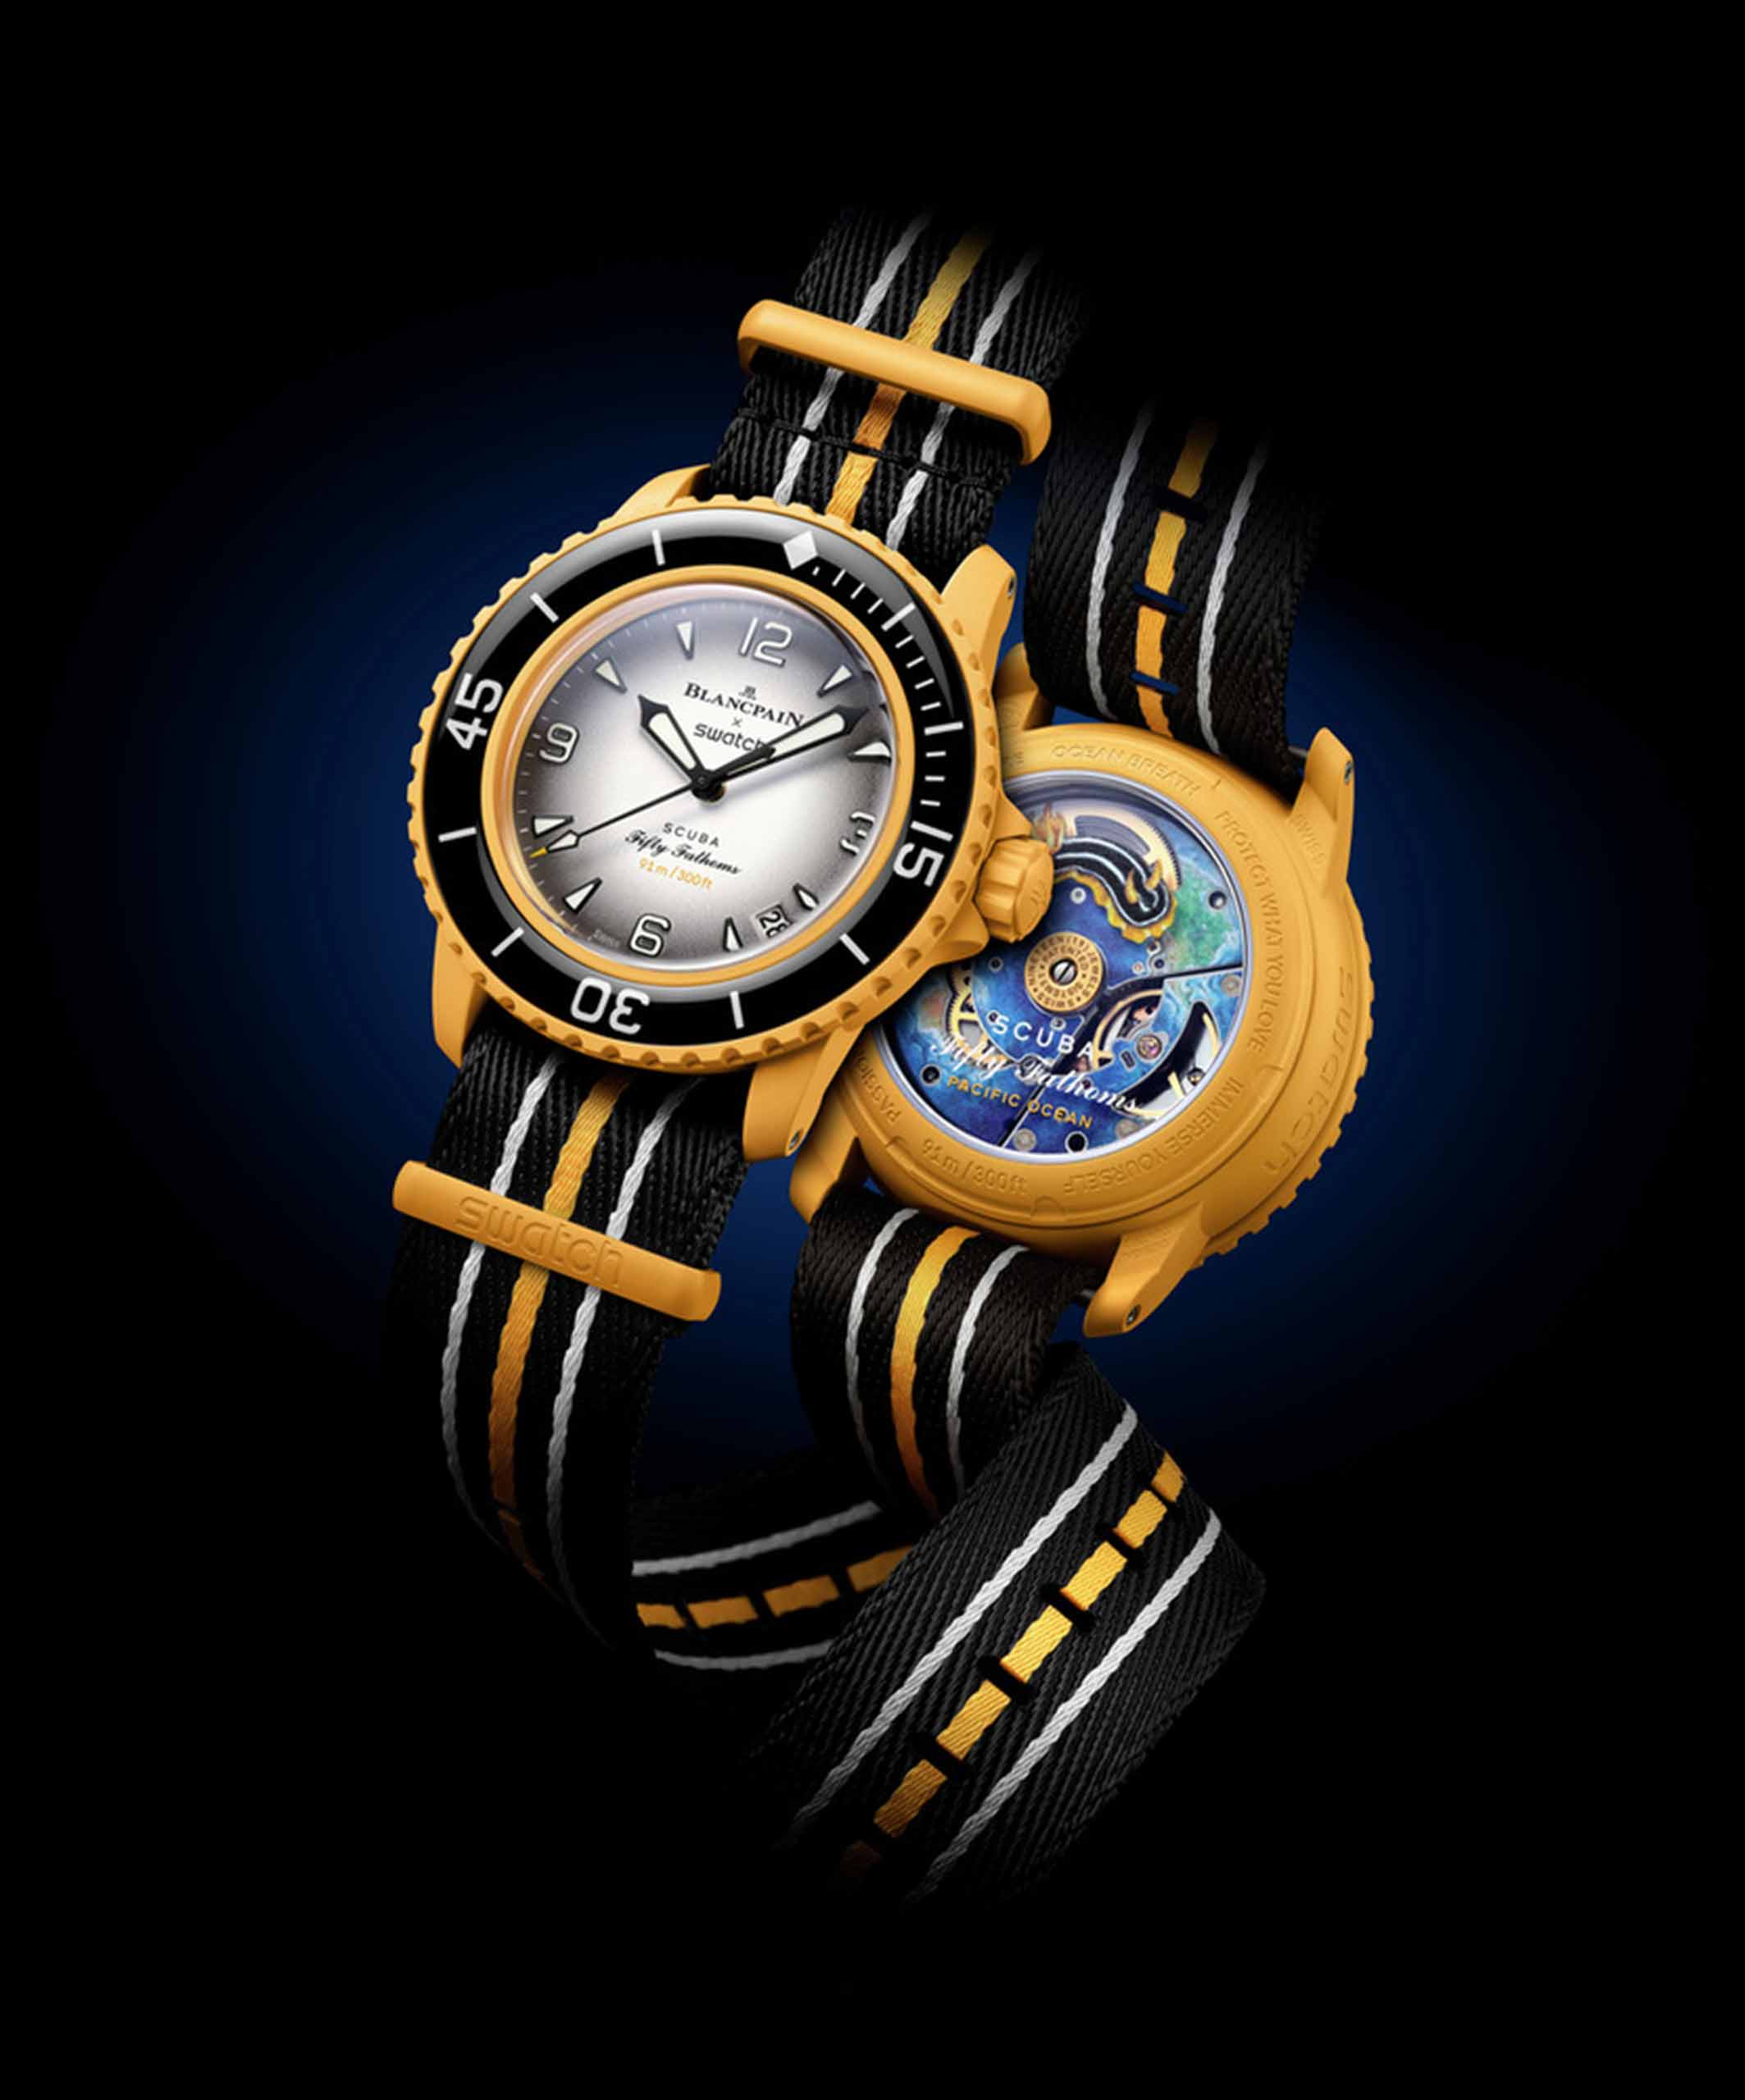 The MoonSwatch May Be Just the First of Swatch's Wild Homage Watches